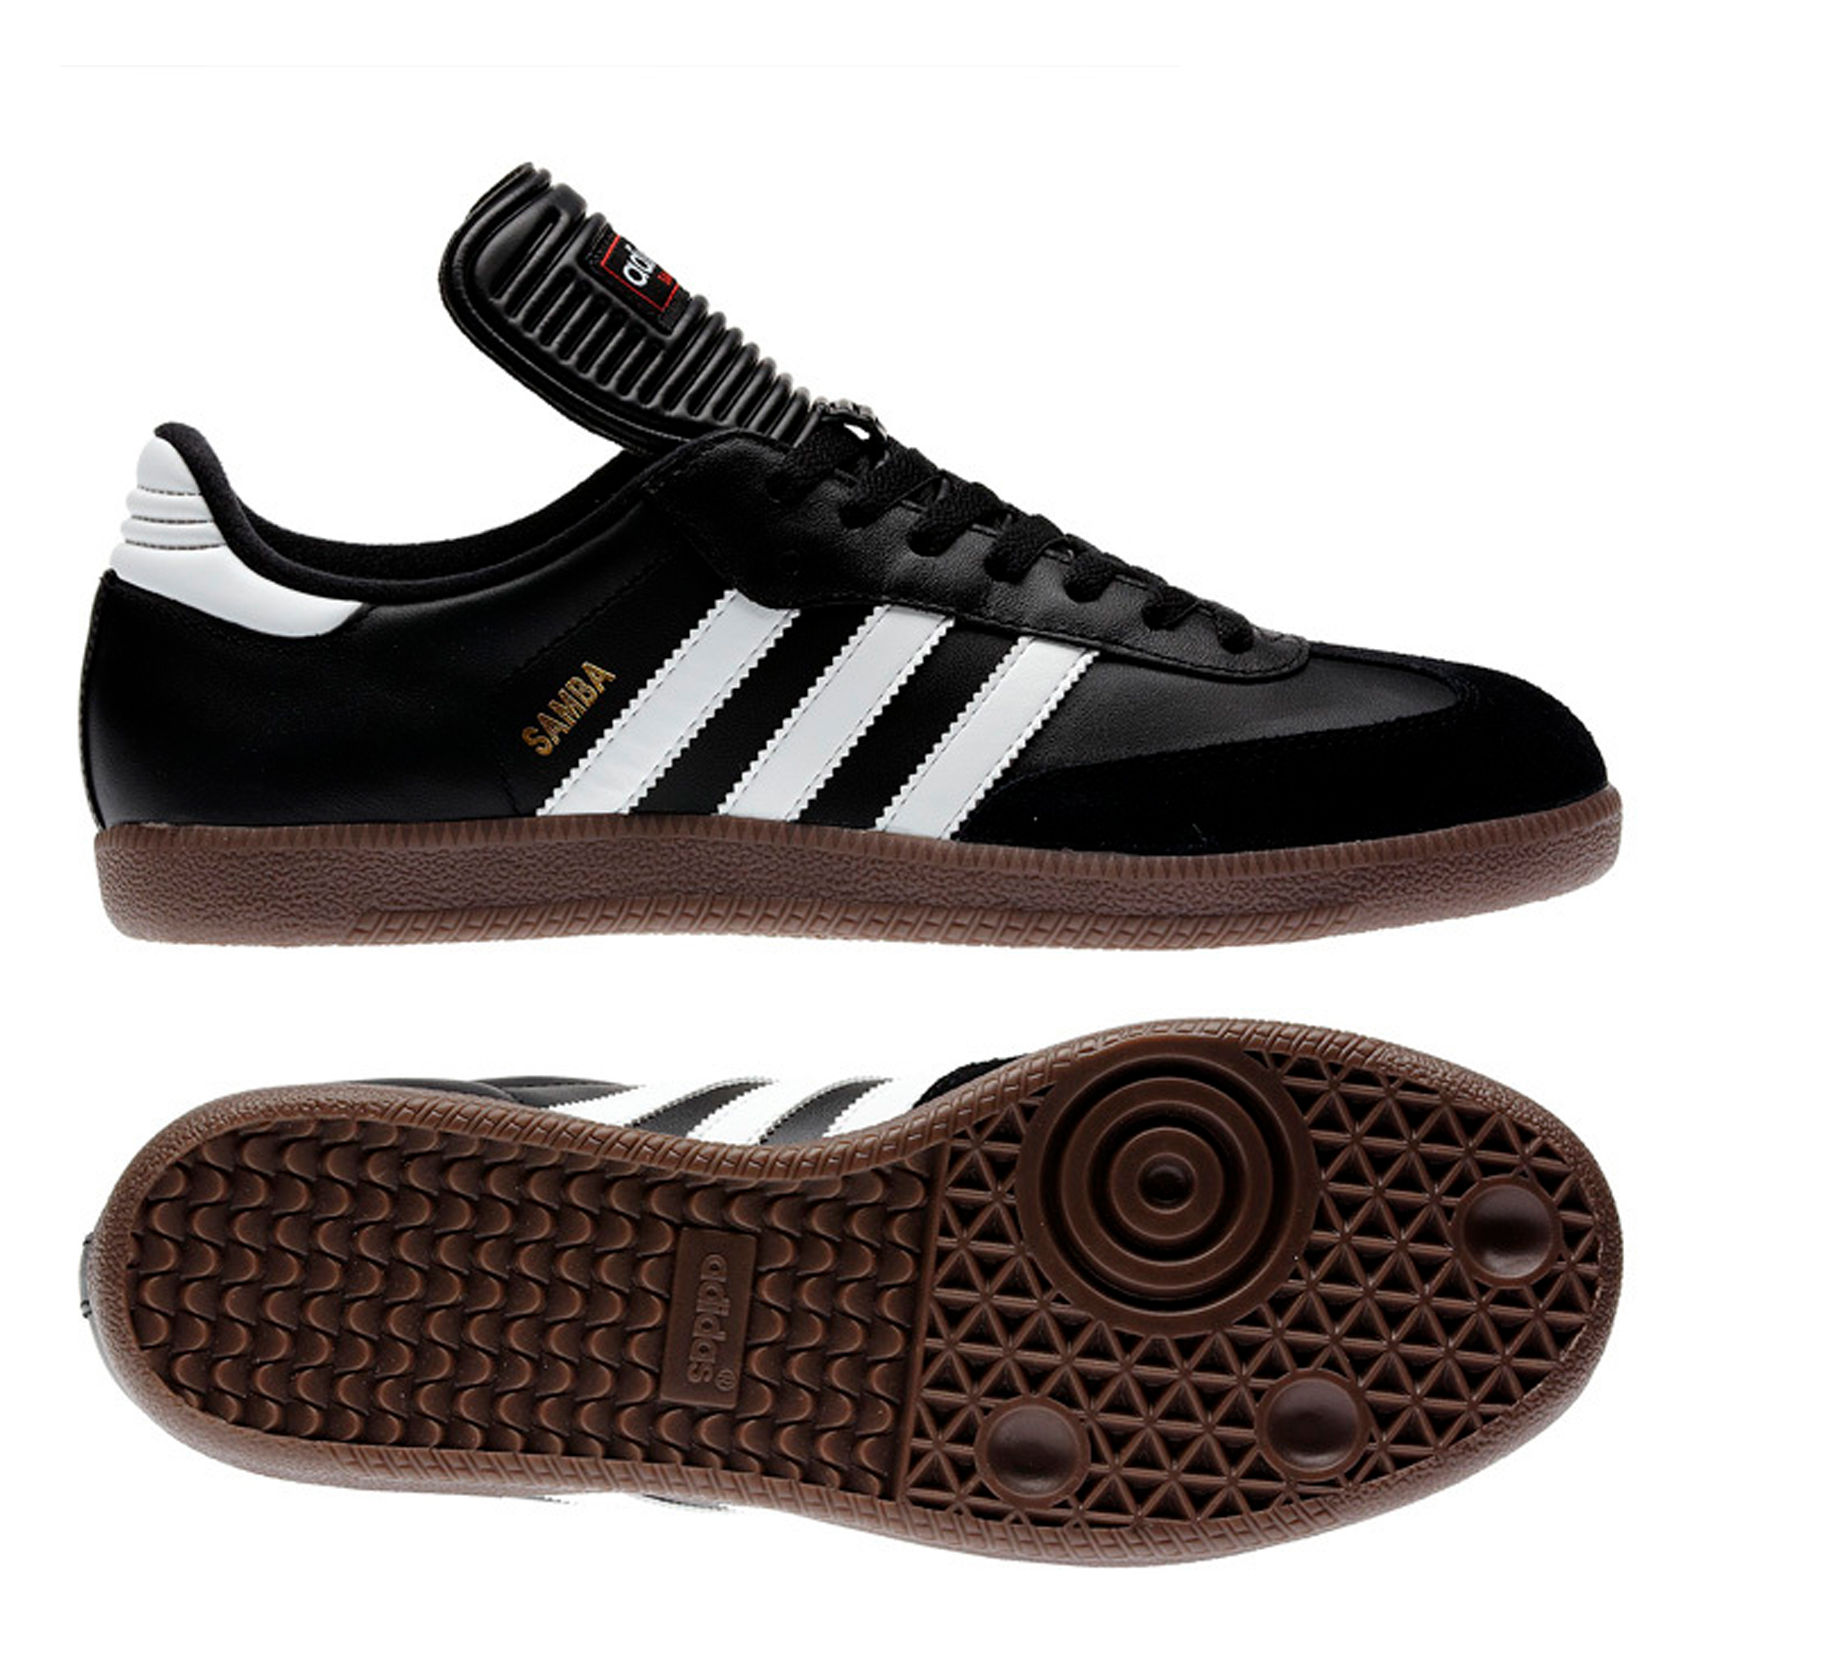 No se mueve embargo taburete A guide to the Adidas Samba, the sneakers linking football and fashion